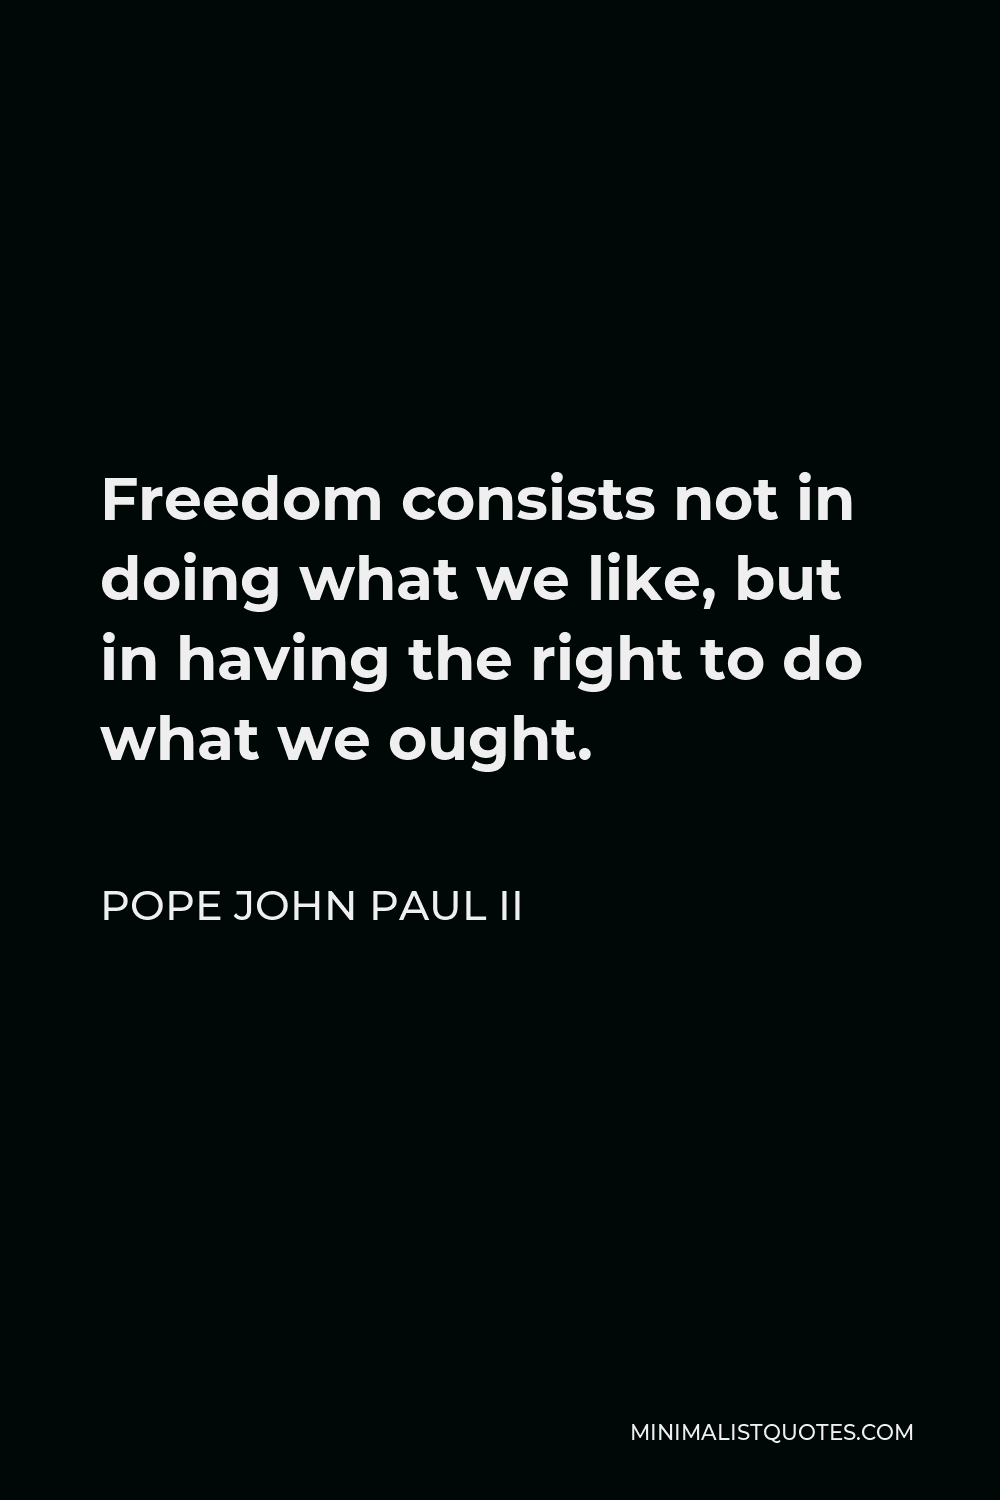 Pope John Paul II Quote - Freedom consists not in doing what we like, but in having the right to do what we ought.